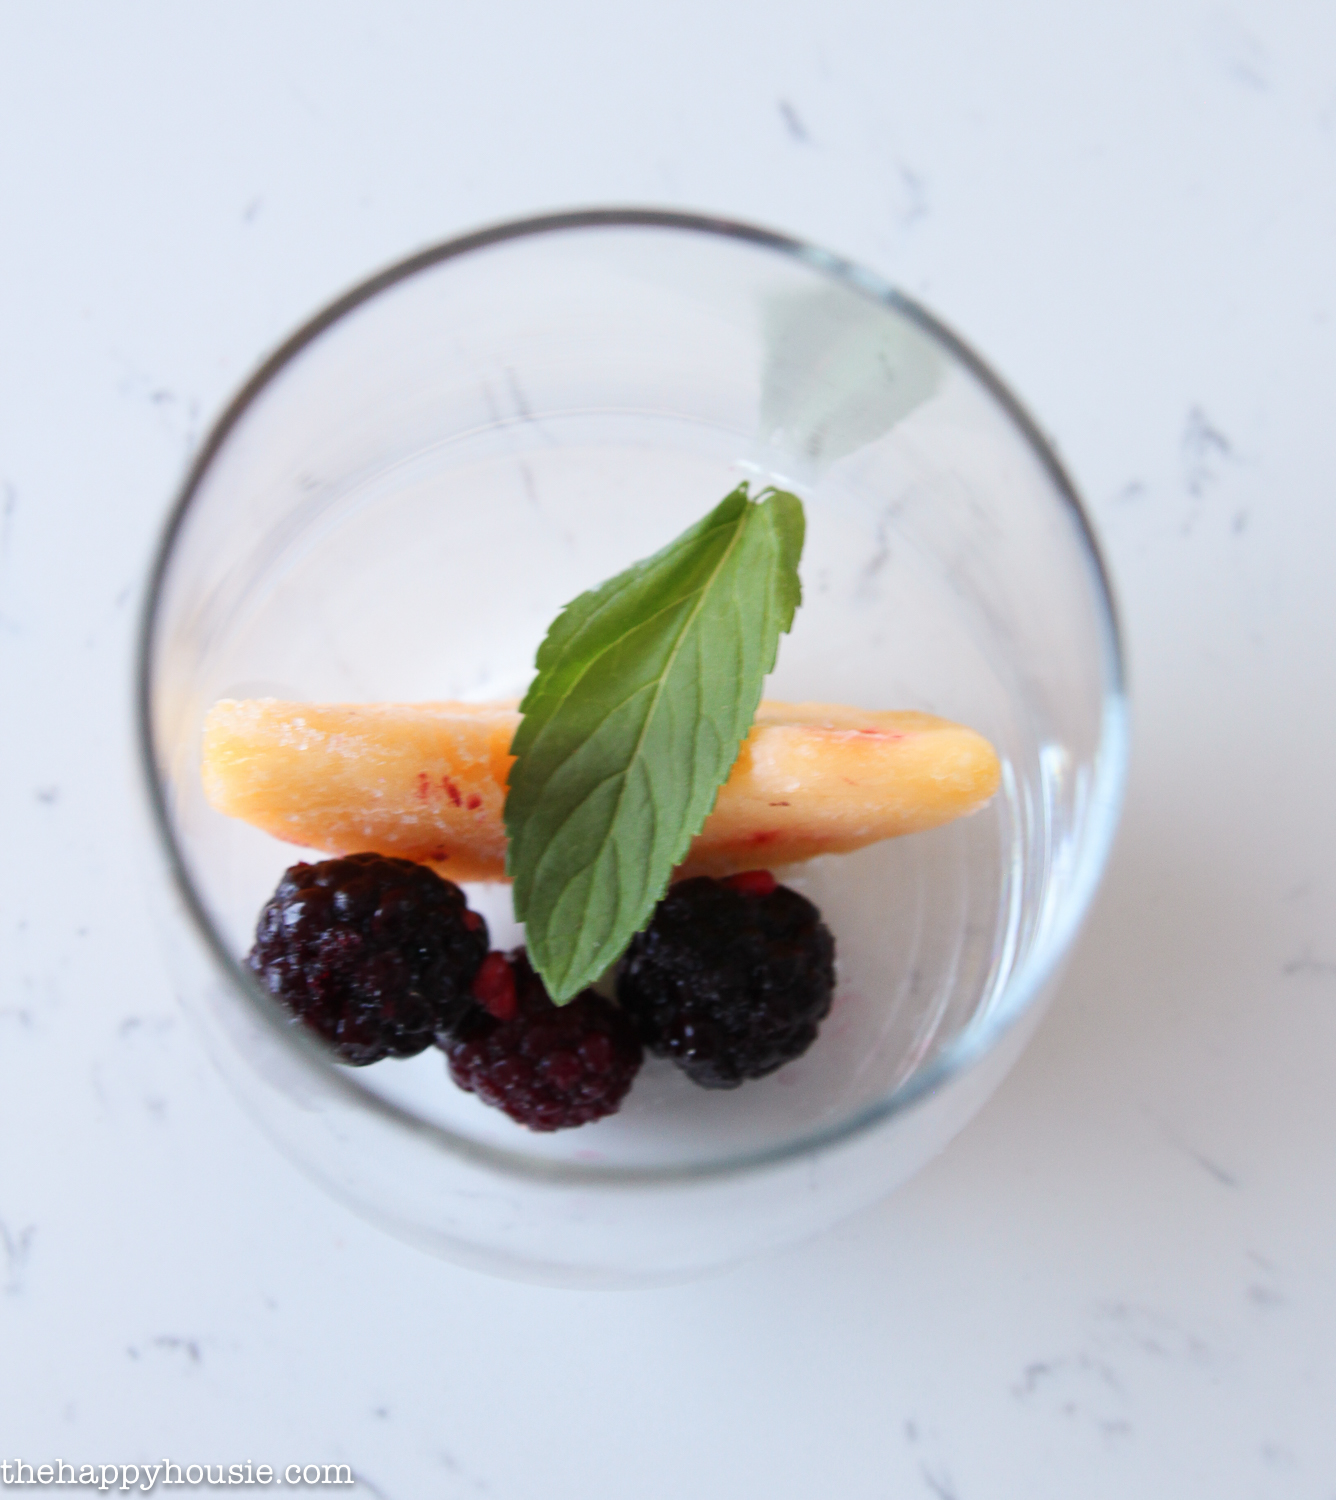 Balckberries, peaches, and a mint leaf in a glass.